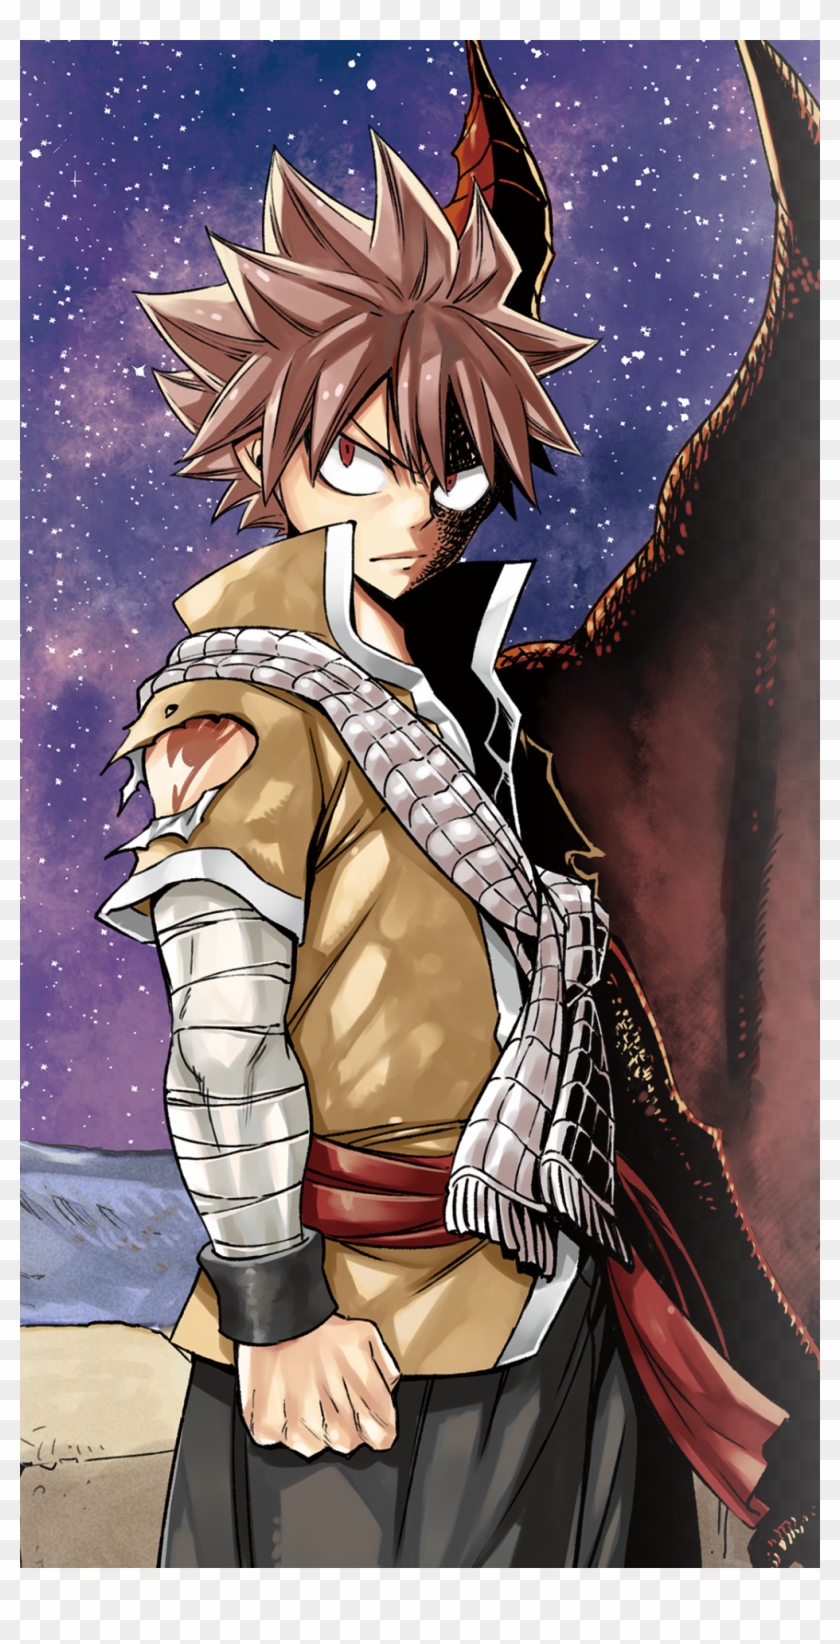 Natsu Dragneel In Dragon Cry, The Second Fairy Tail - Natsu Fairy Tail Dragon Cry Clipart